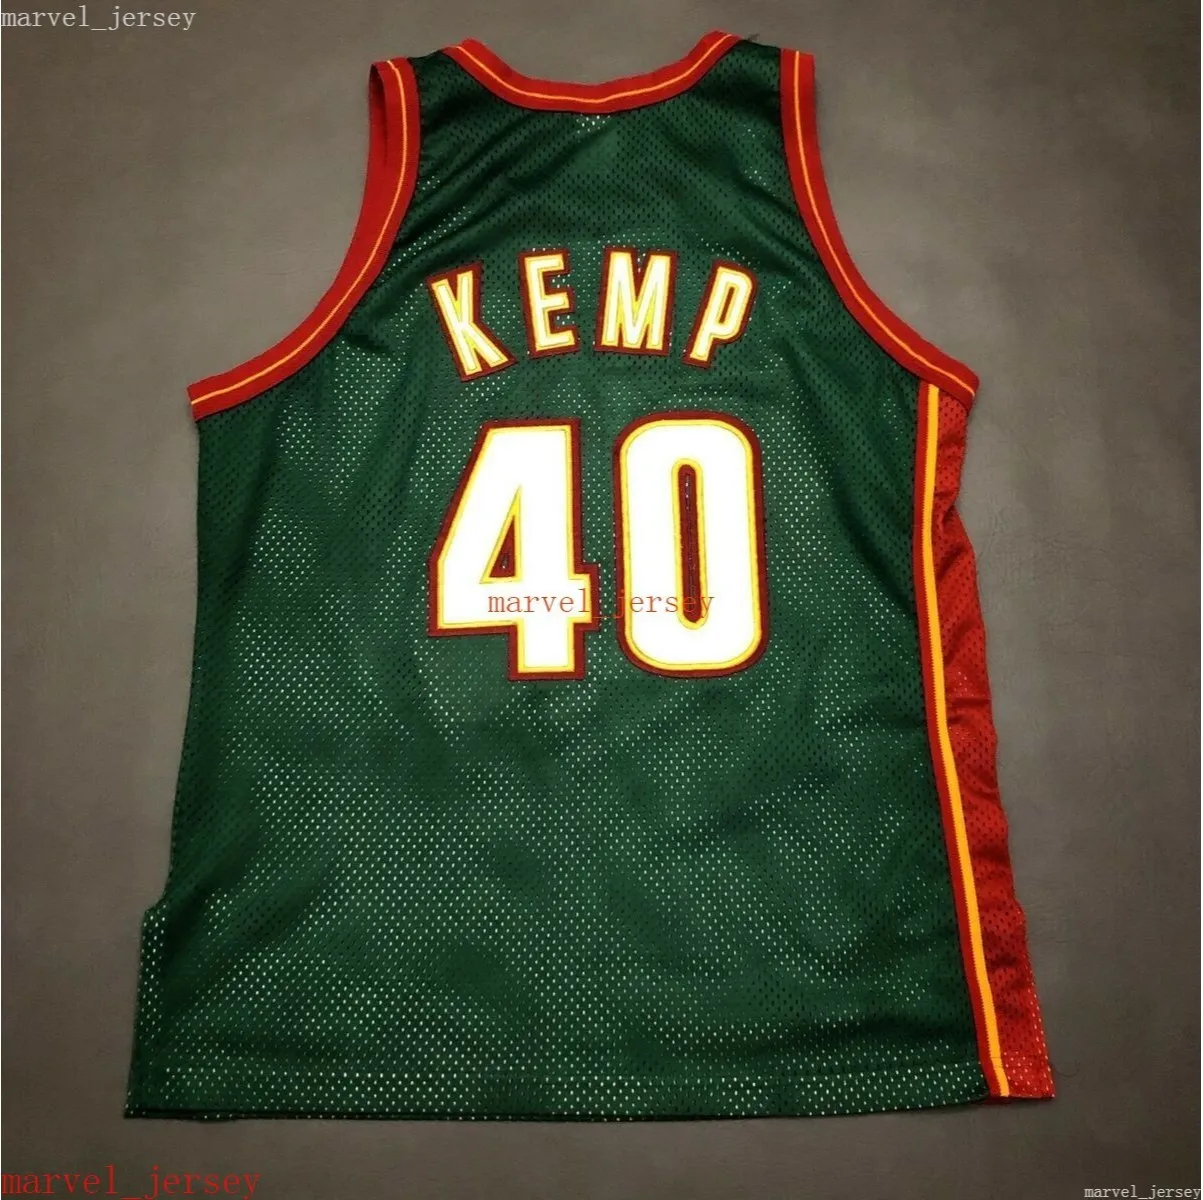 Costume Stitched Shawn Kemp Campeão Vintage 96 97 Jersey XS-6XL Mens Mens Retrocedores Basquete Jerseys Homens Baratos Mulheres Juventude